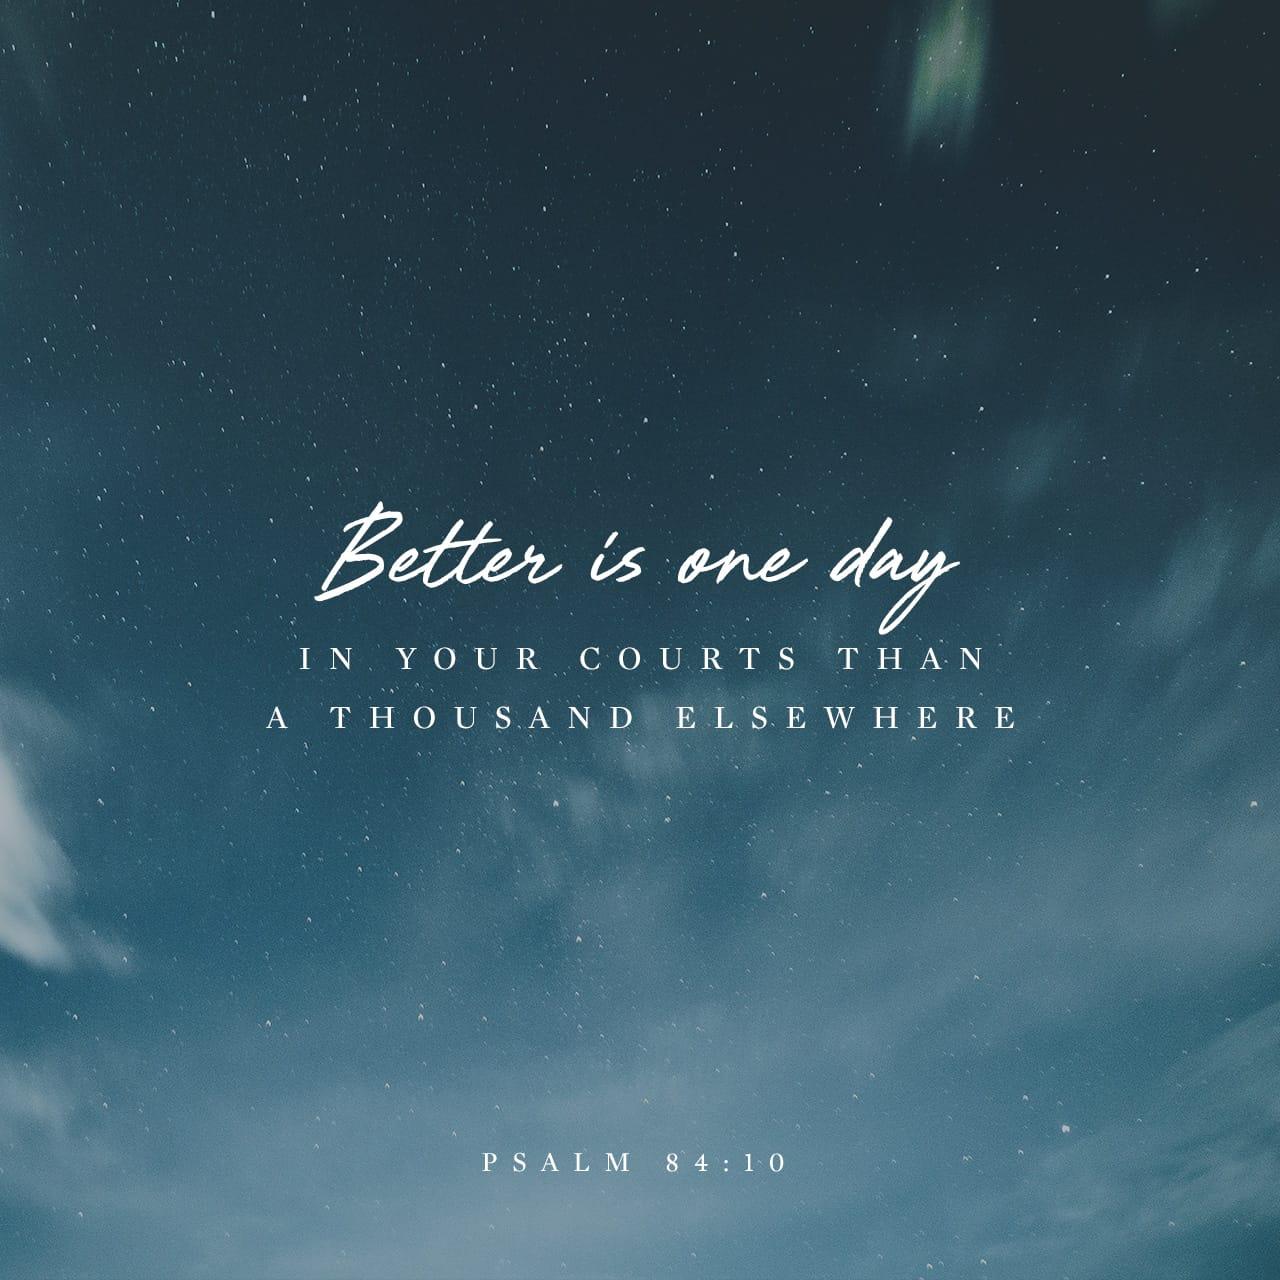 Bible Verse of the Day - day 91 - image 2603 (Psalms 84:1-12)